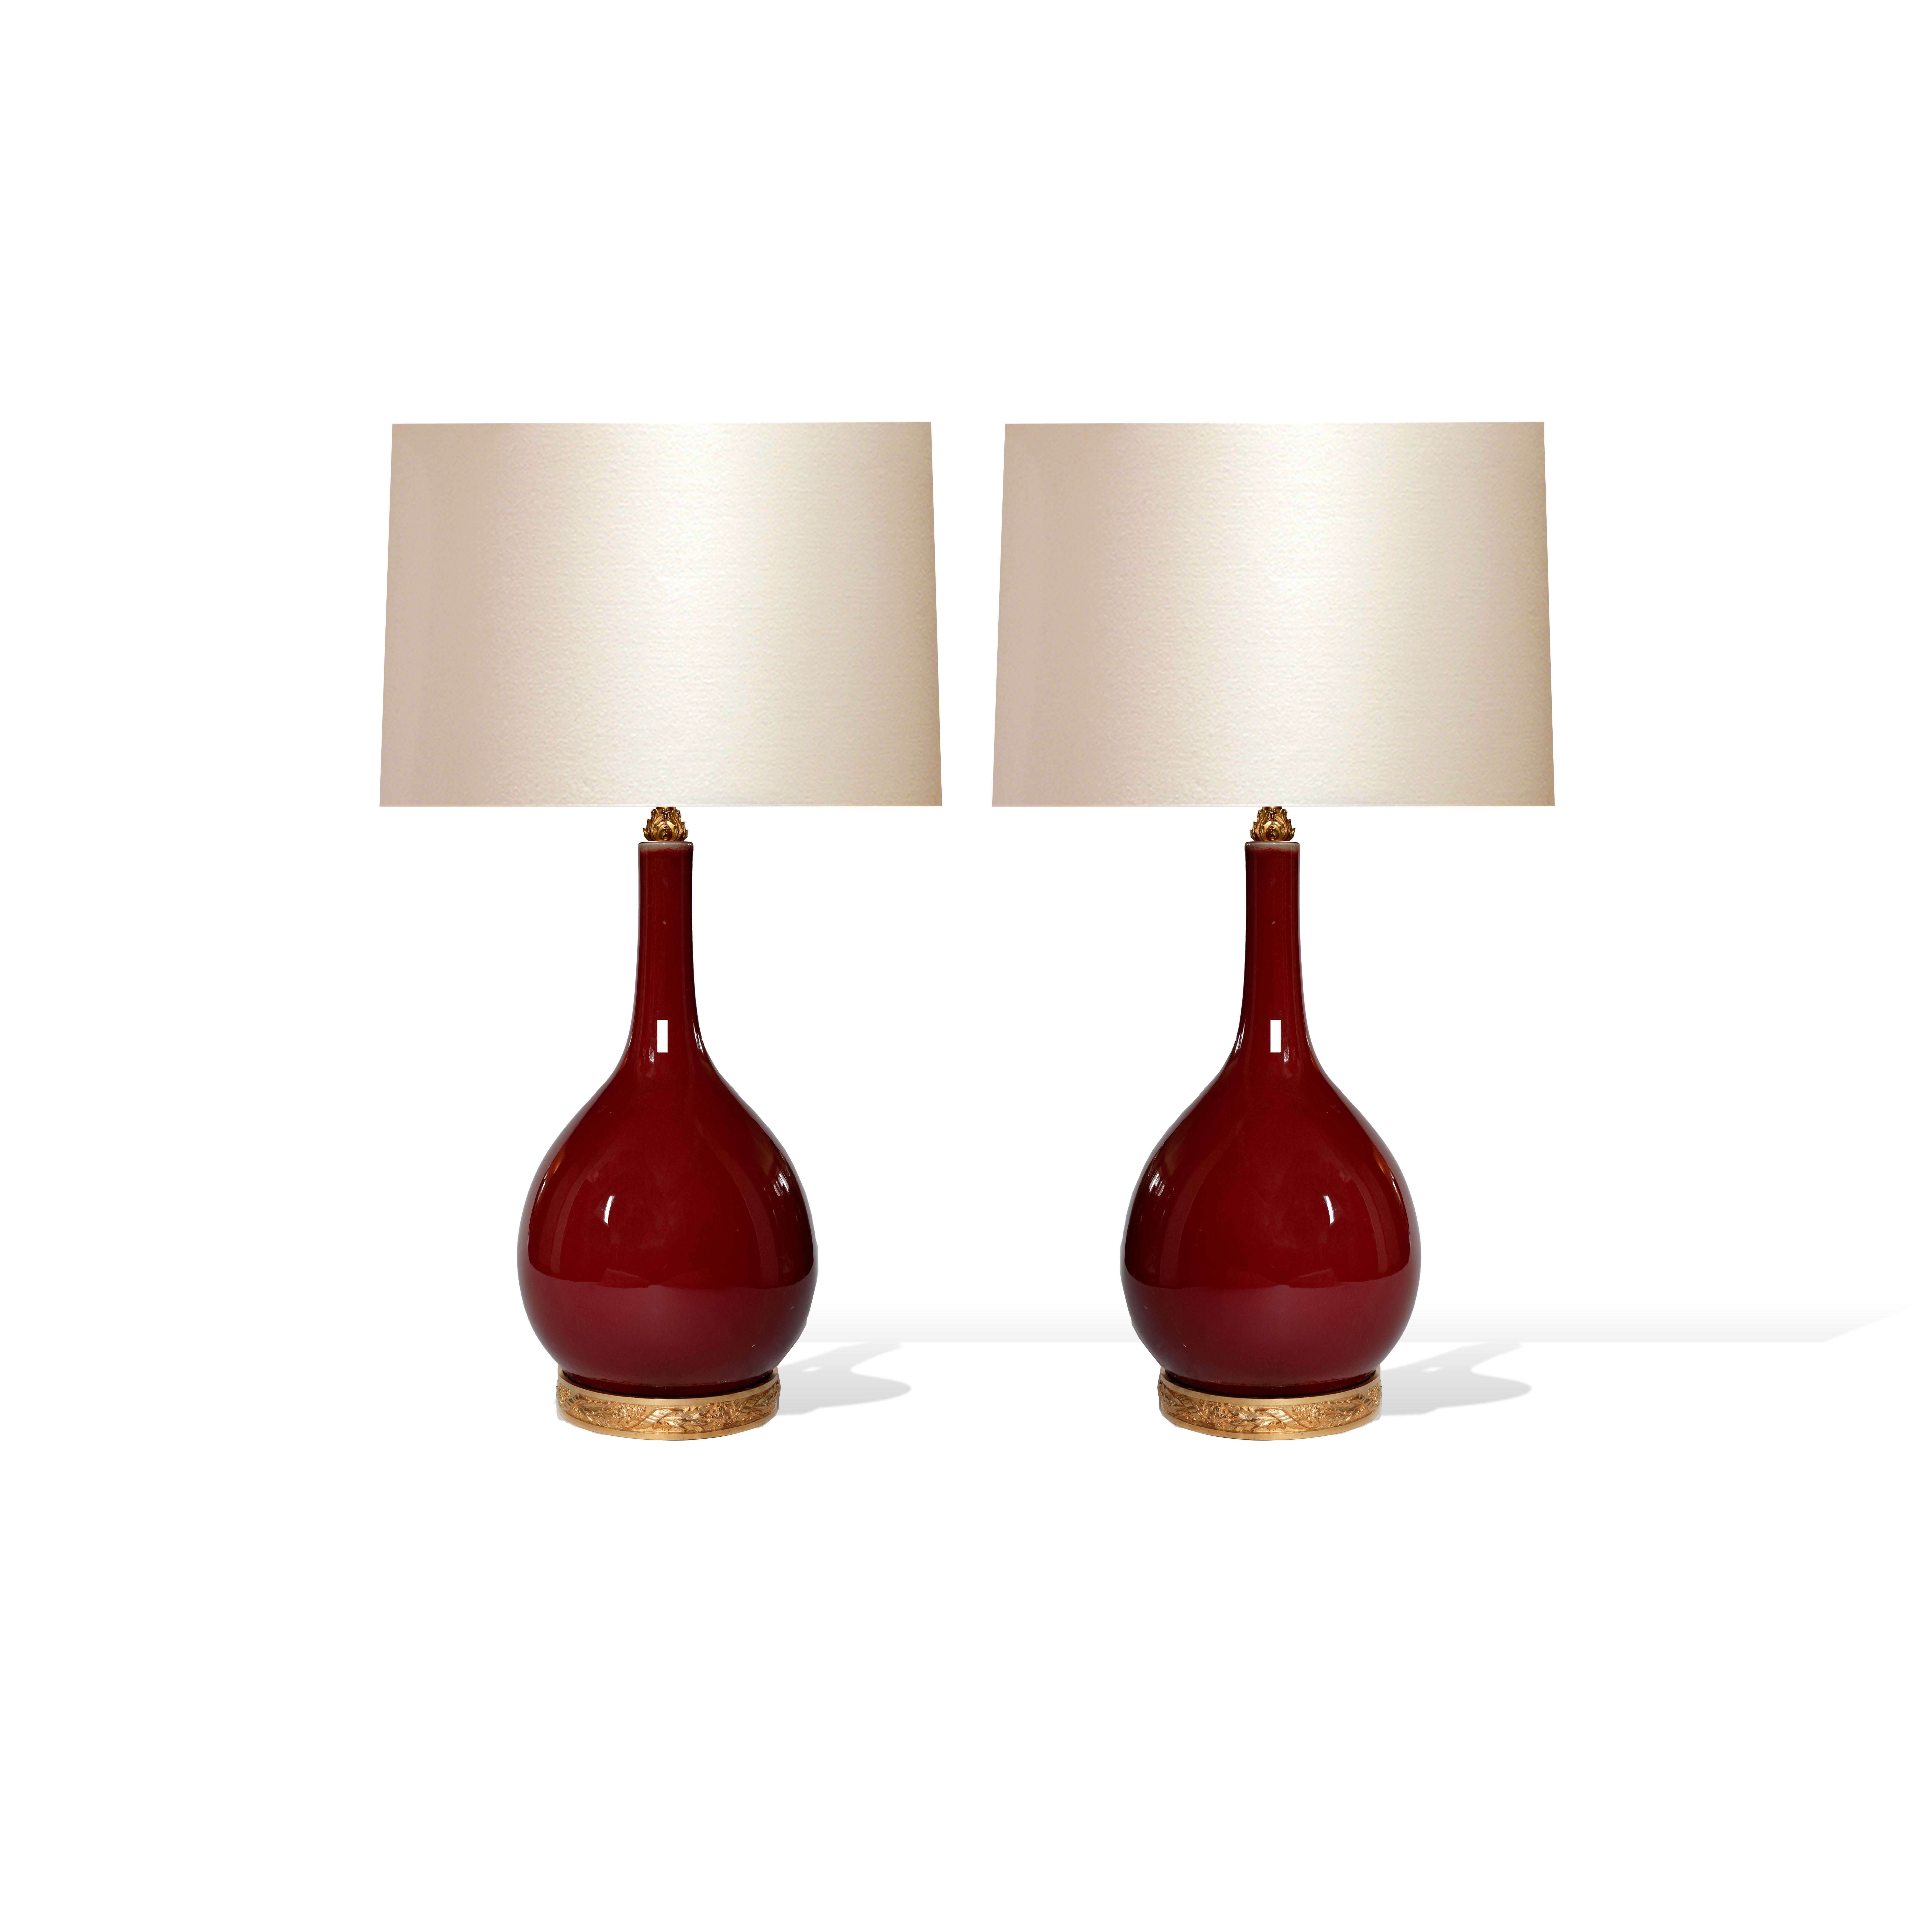 Pair of oxblood glazed porcelain lamps with gilt brass bases,
Each lamp installed two sockets, e26 bases, to the top of the porcelain 21 inch.